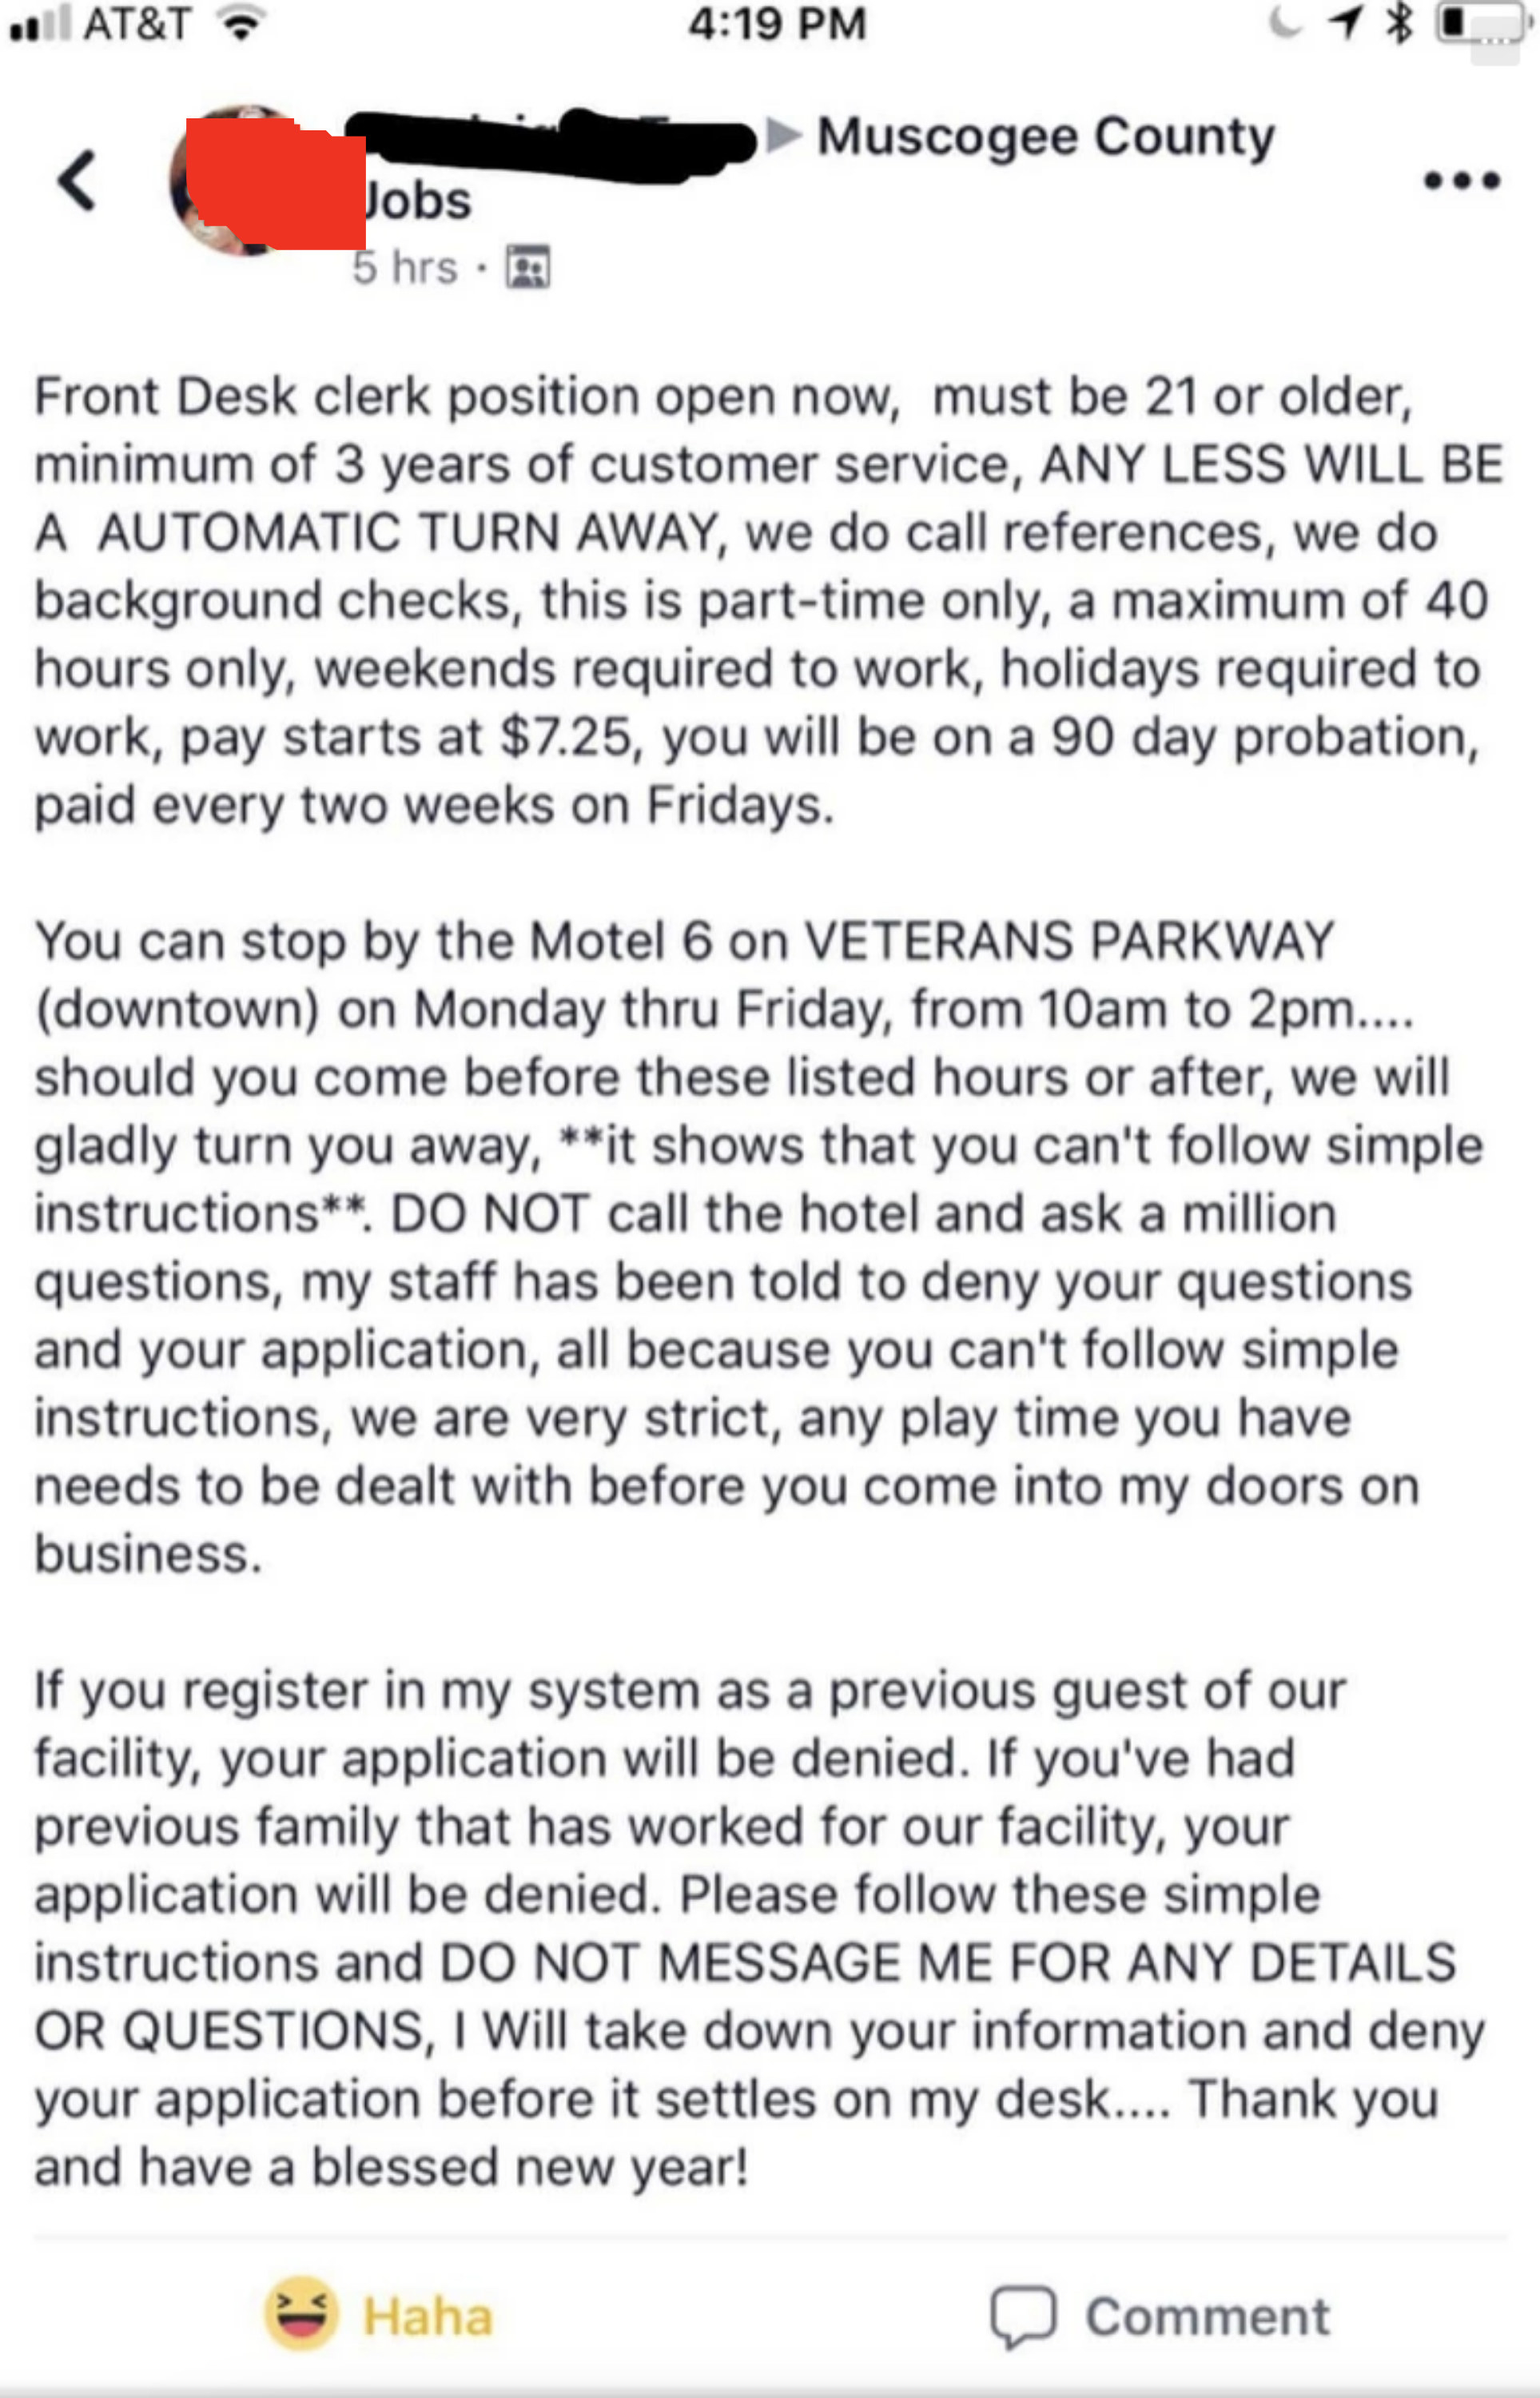 Minimum 3 years of customer service experience, &quot;part-time&quot; but a max of &quot;40 hours,&quot; must work weekends and holidays, can&#x27;t call with questions, can&#x27;t apply if you have ever been a guest or a relative has worked for the place before